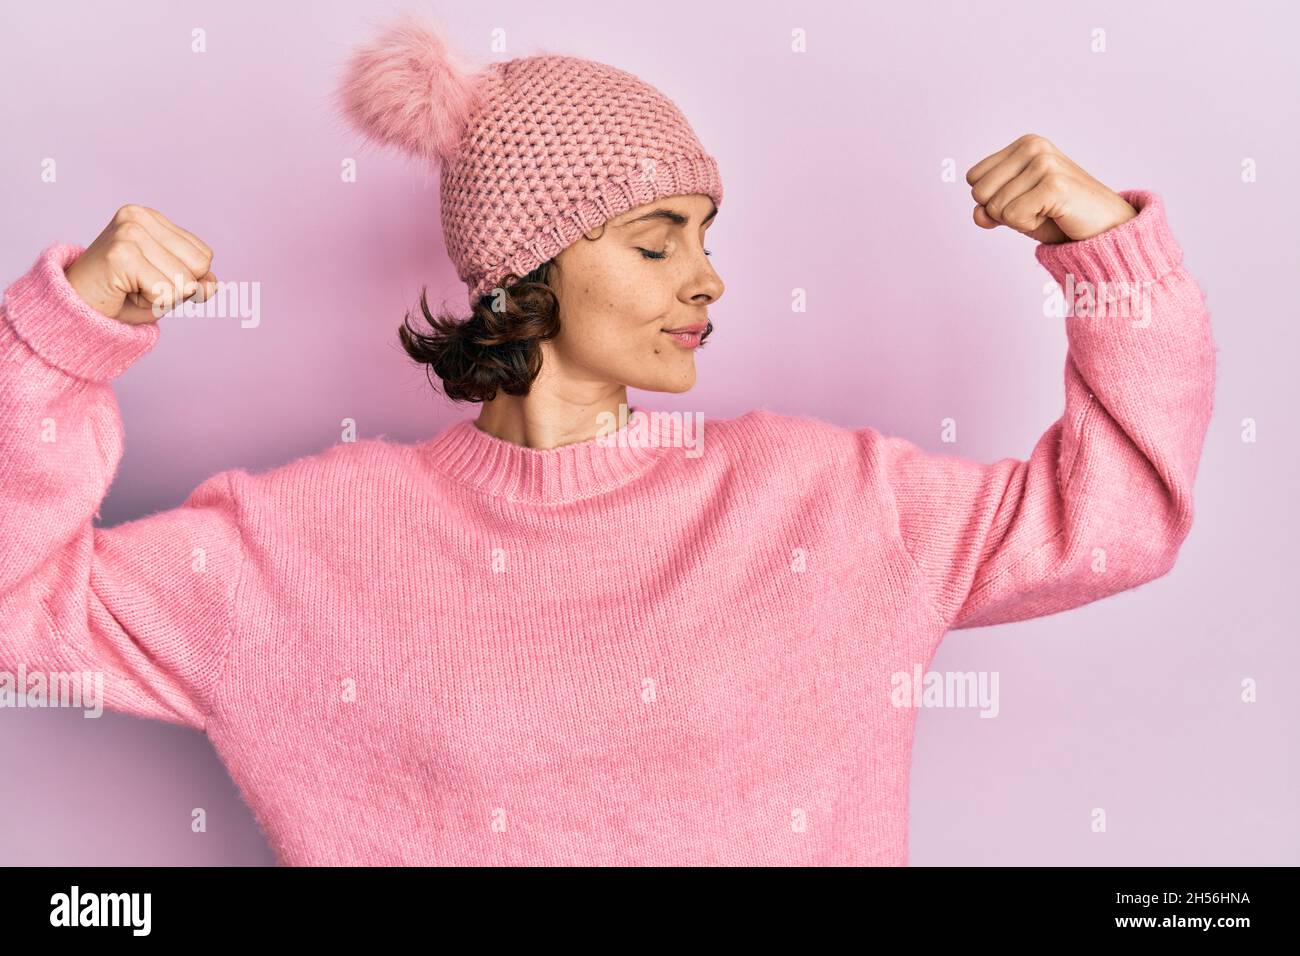 Young brunette woman wearing cute wool cap showing arms muscles smiling proud. fitness concept. Stock Photo